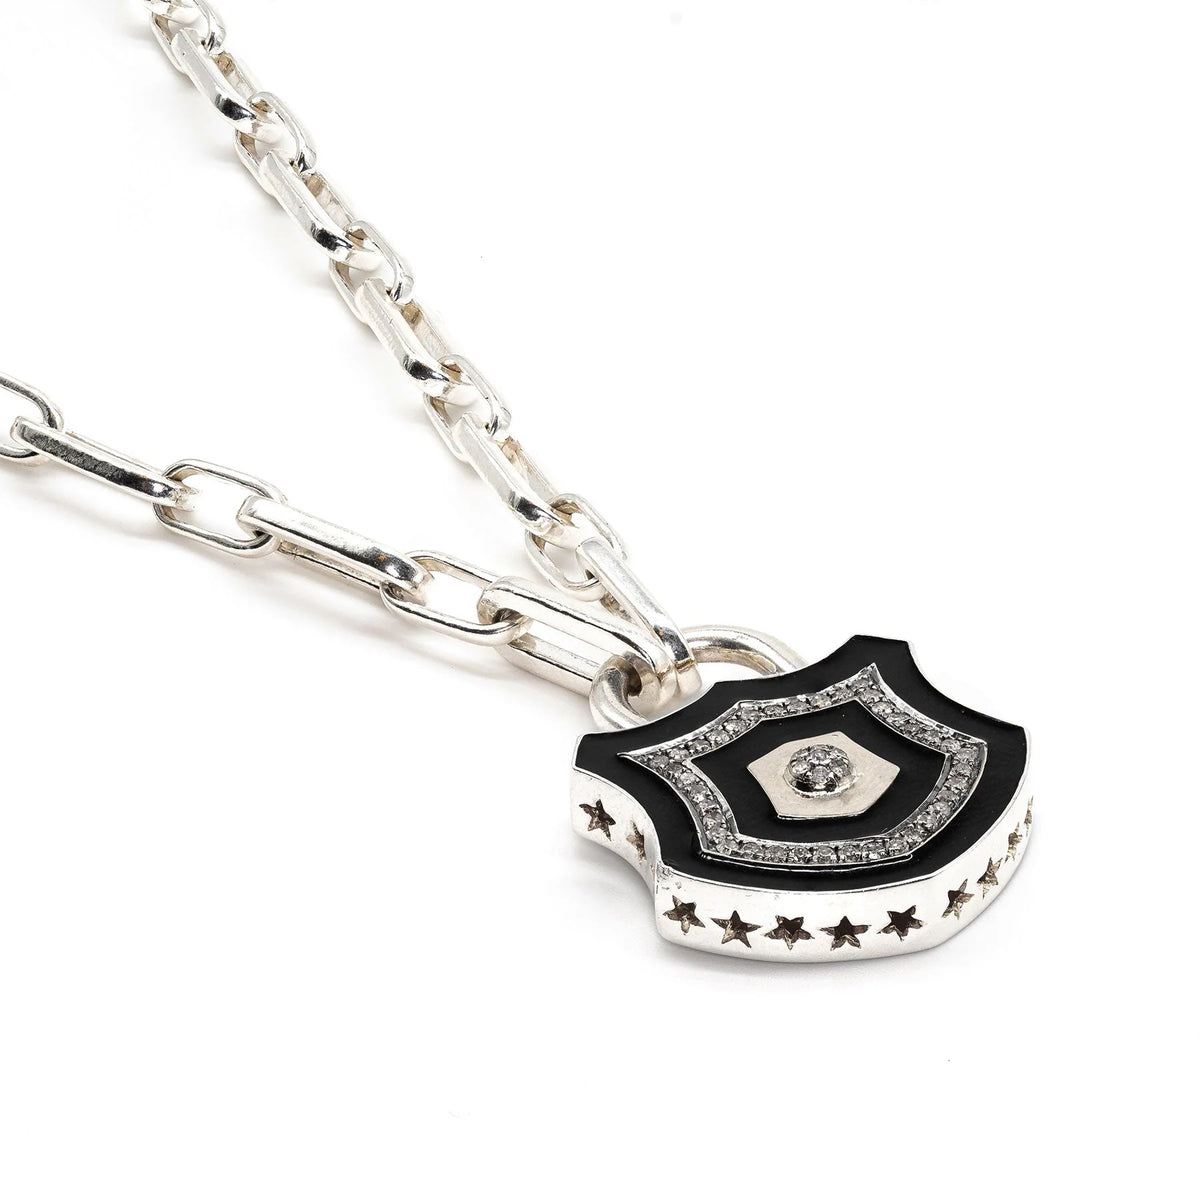 Chunky silver chain with black enamel lock with diamond details